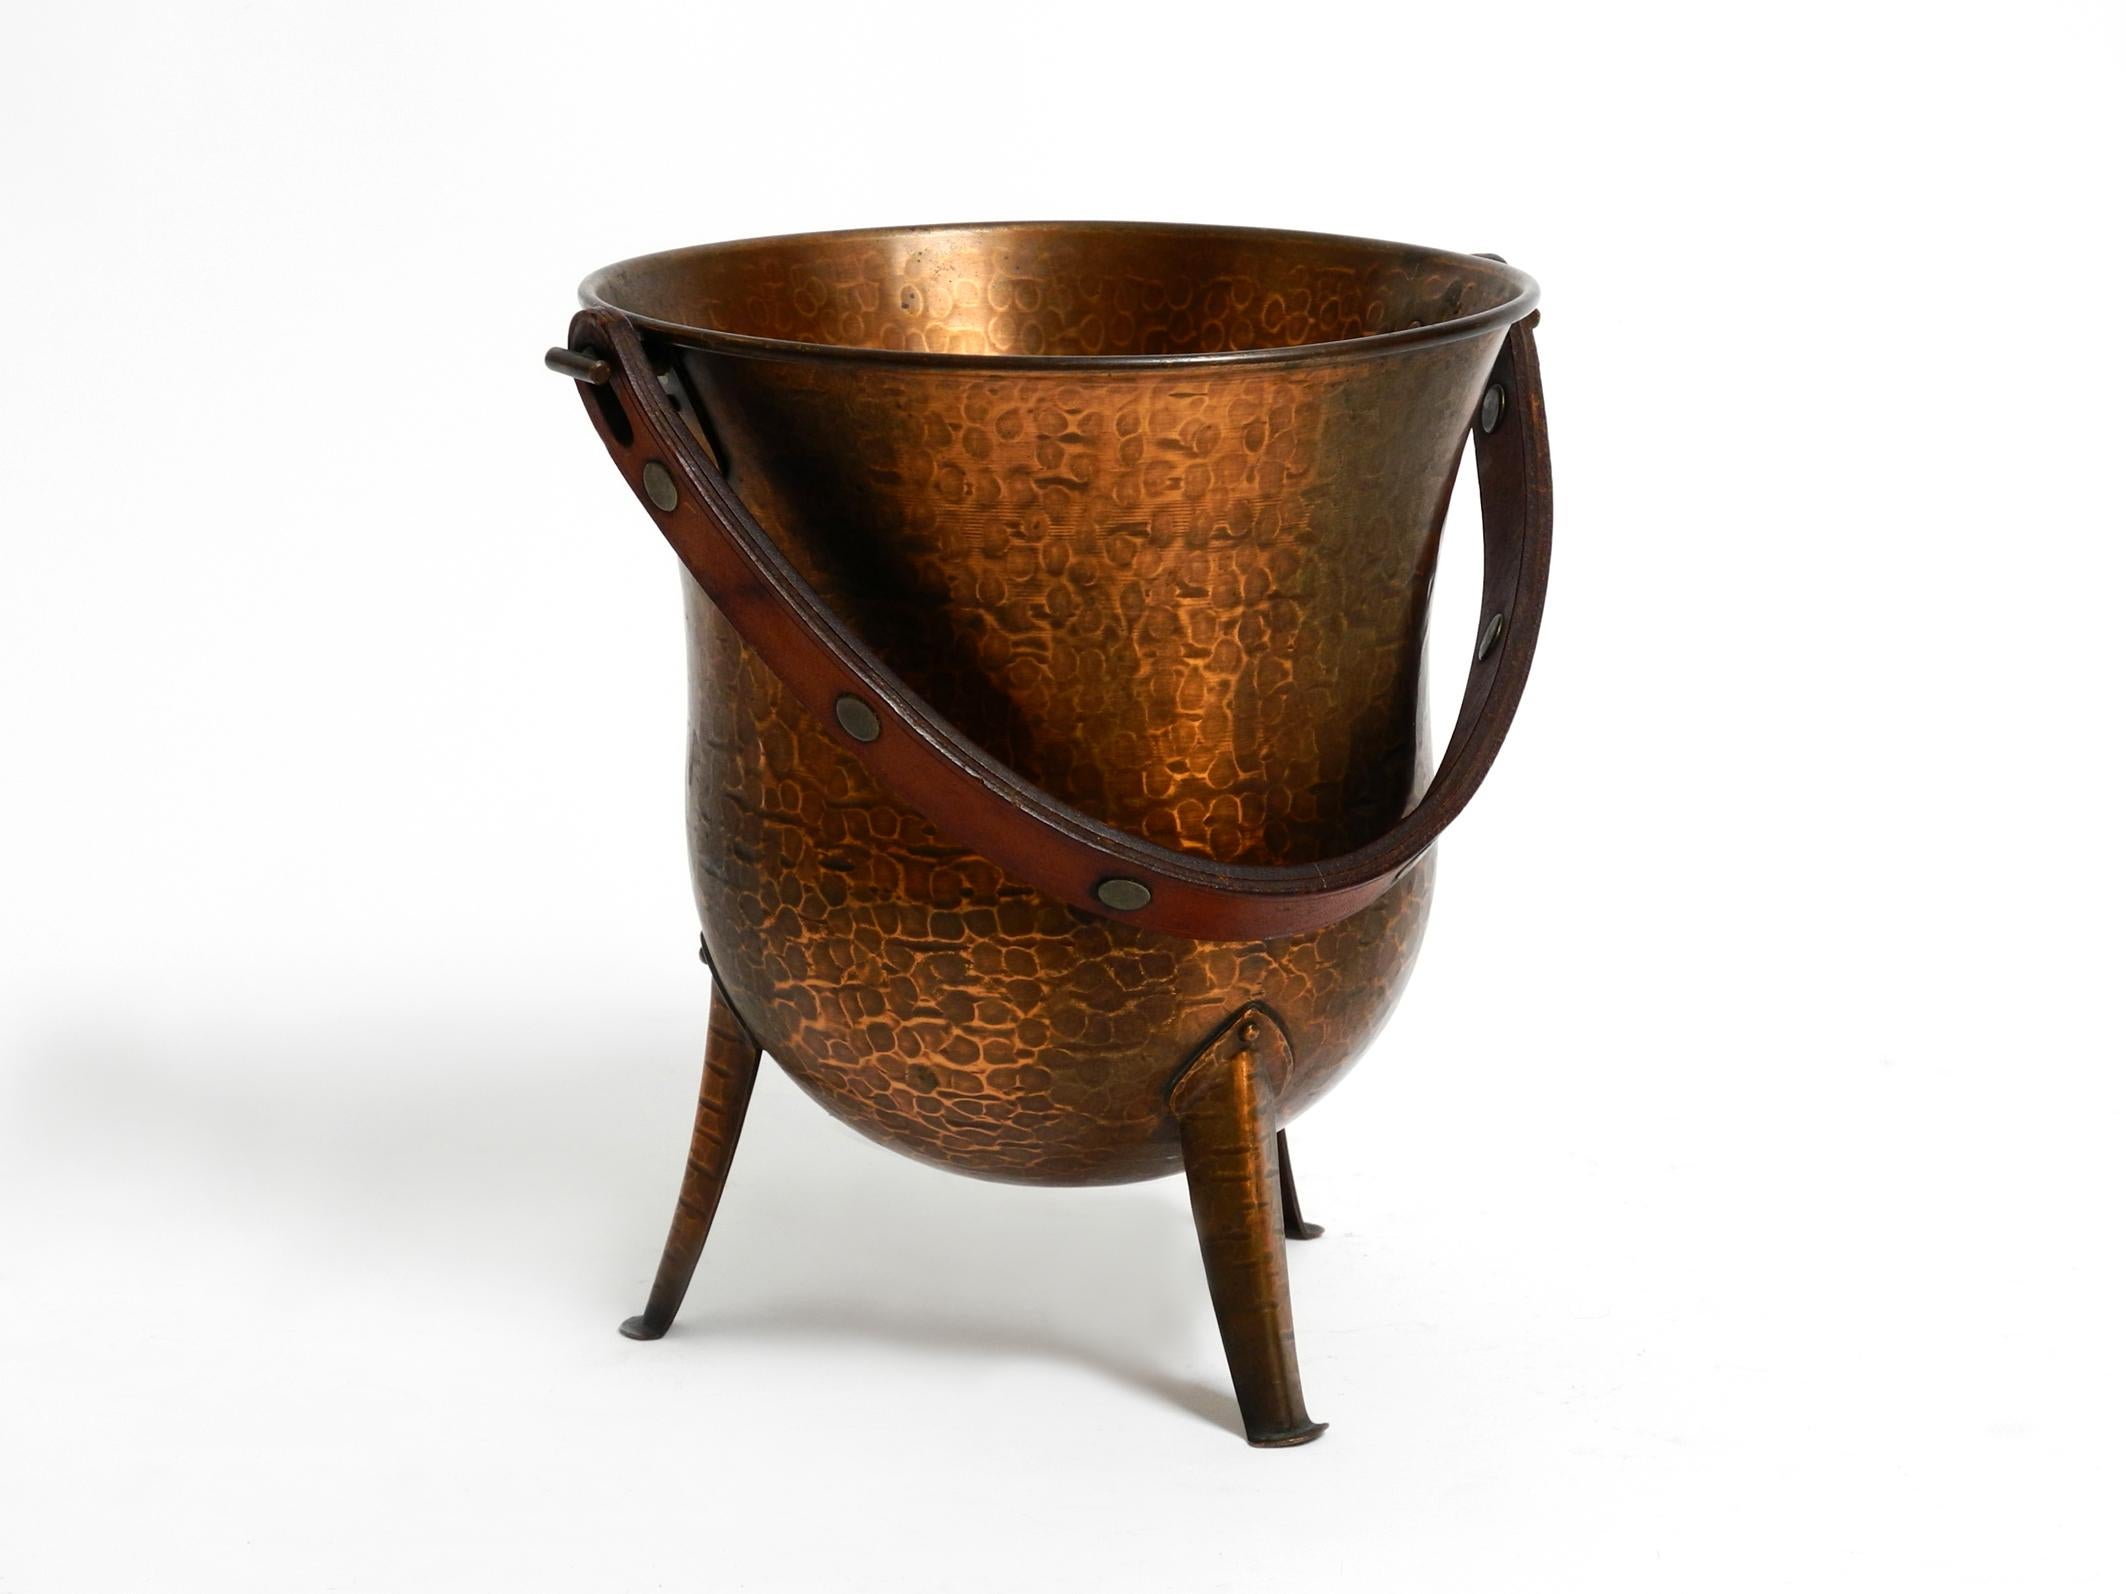 German Rare Beautiful Midcentury Copper Champagne Wine Cooler by Harald Buchrucker For Sale